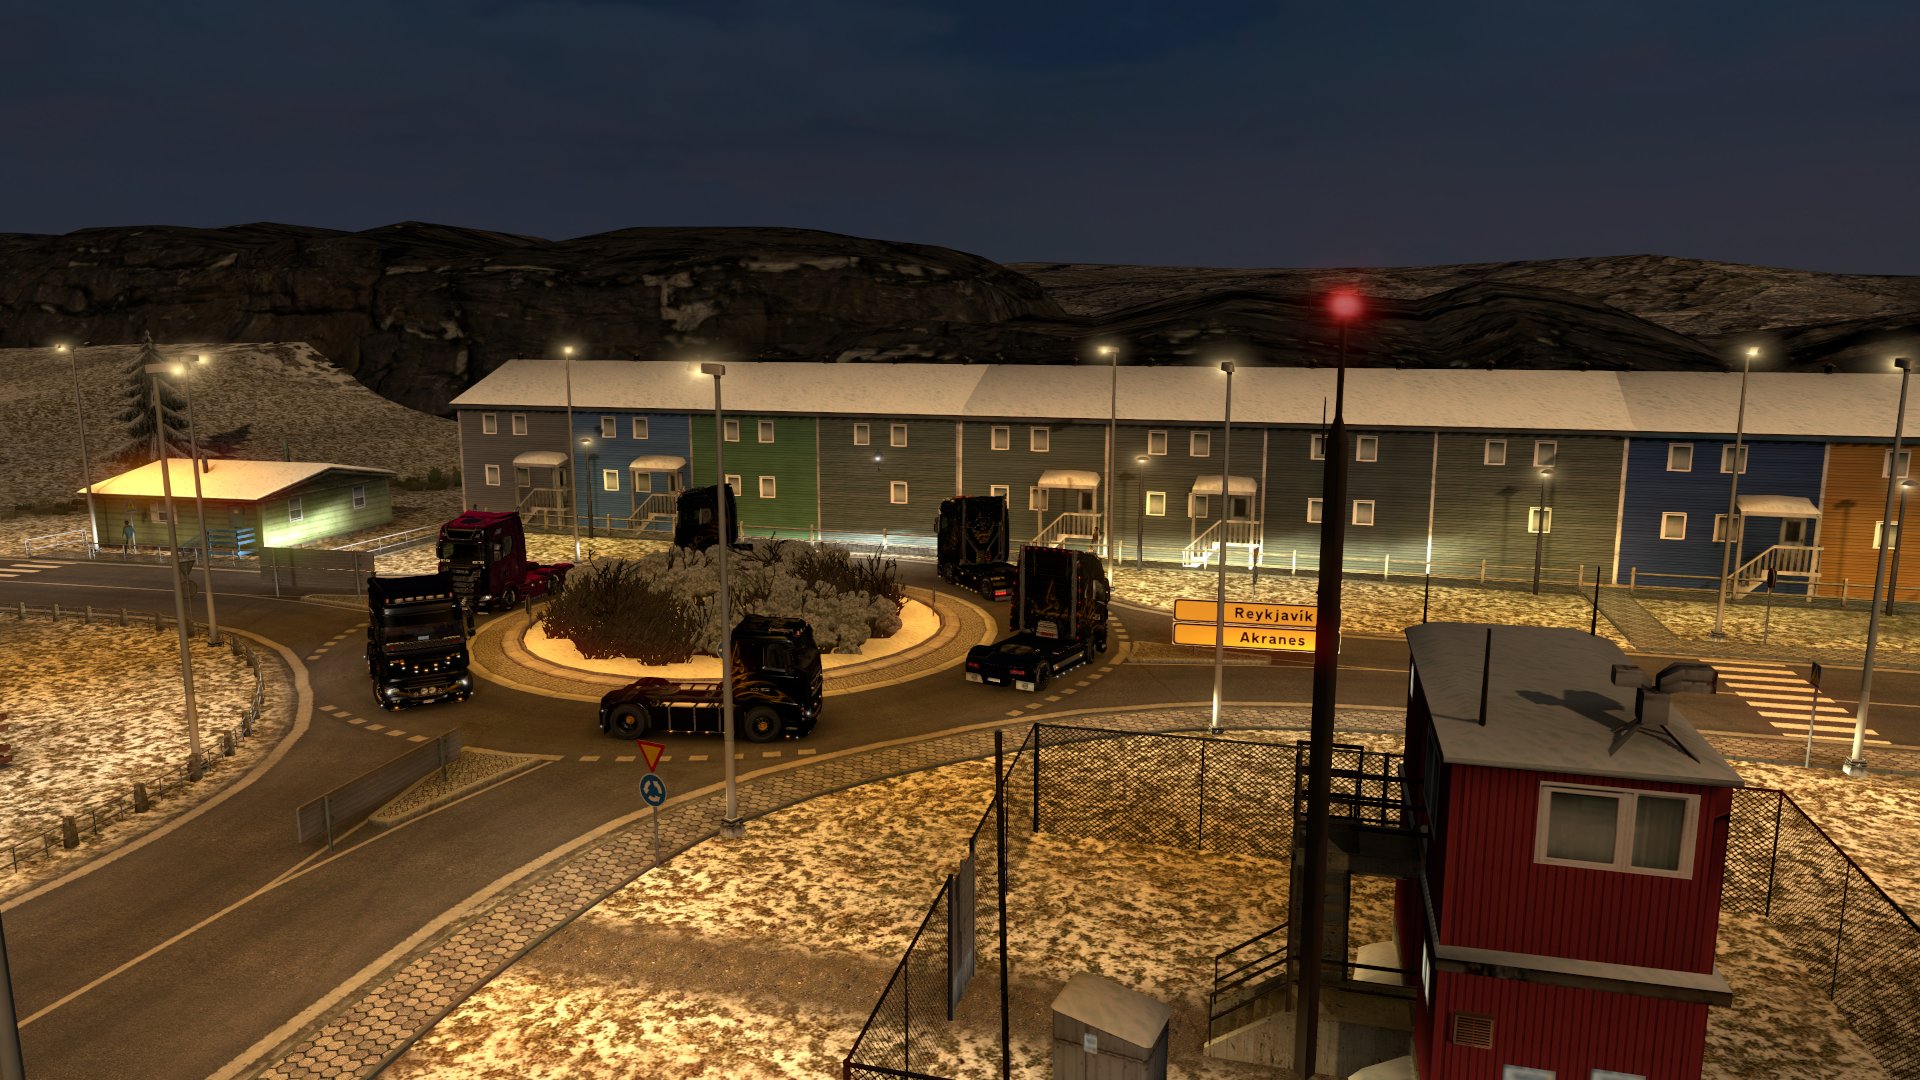 ets2_20210321_004023_00.png